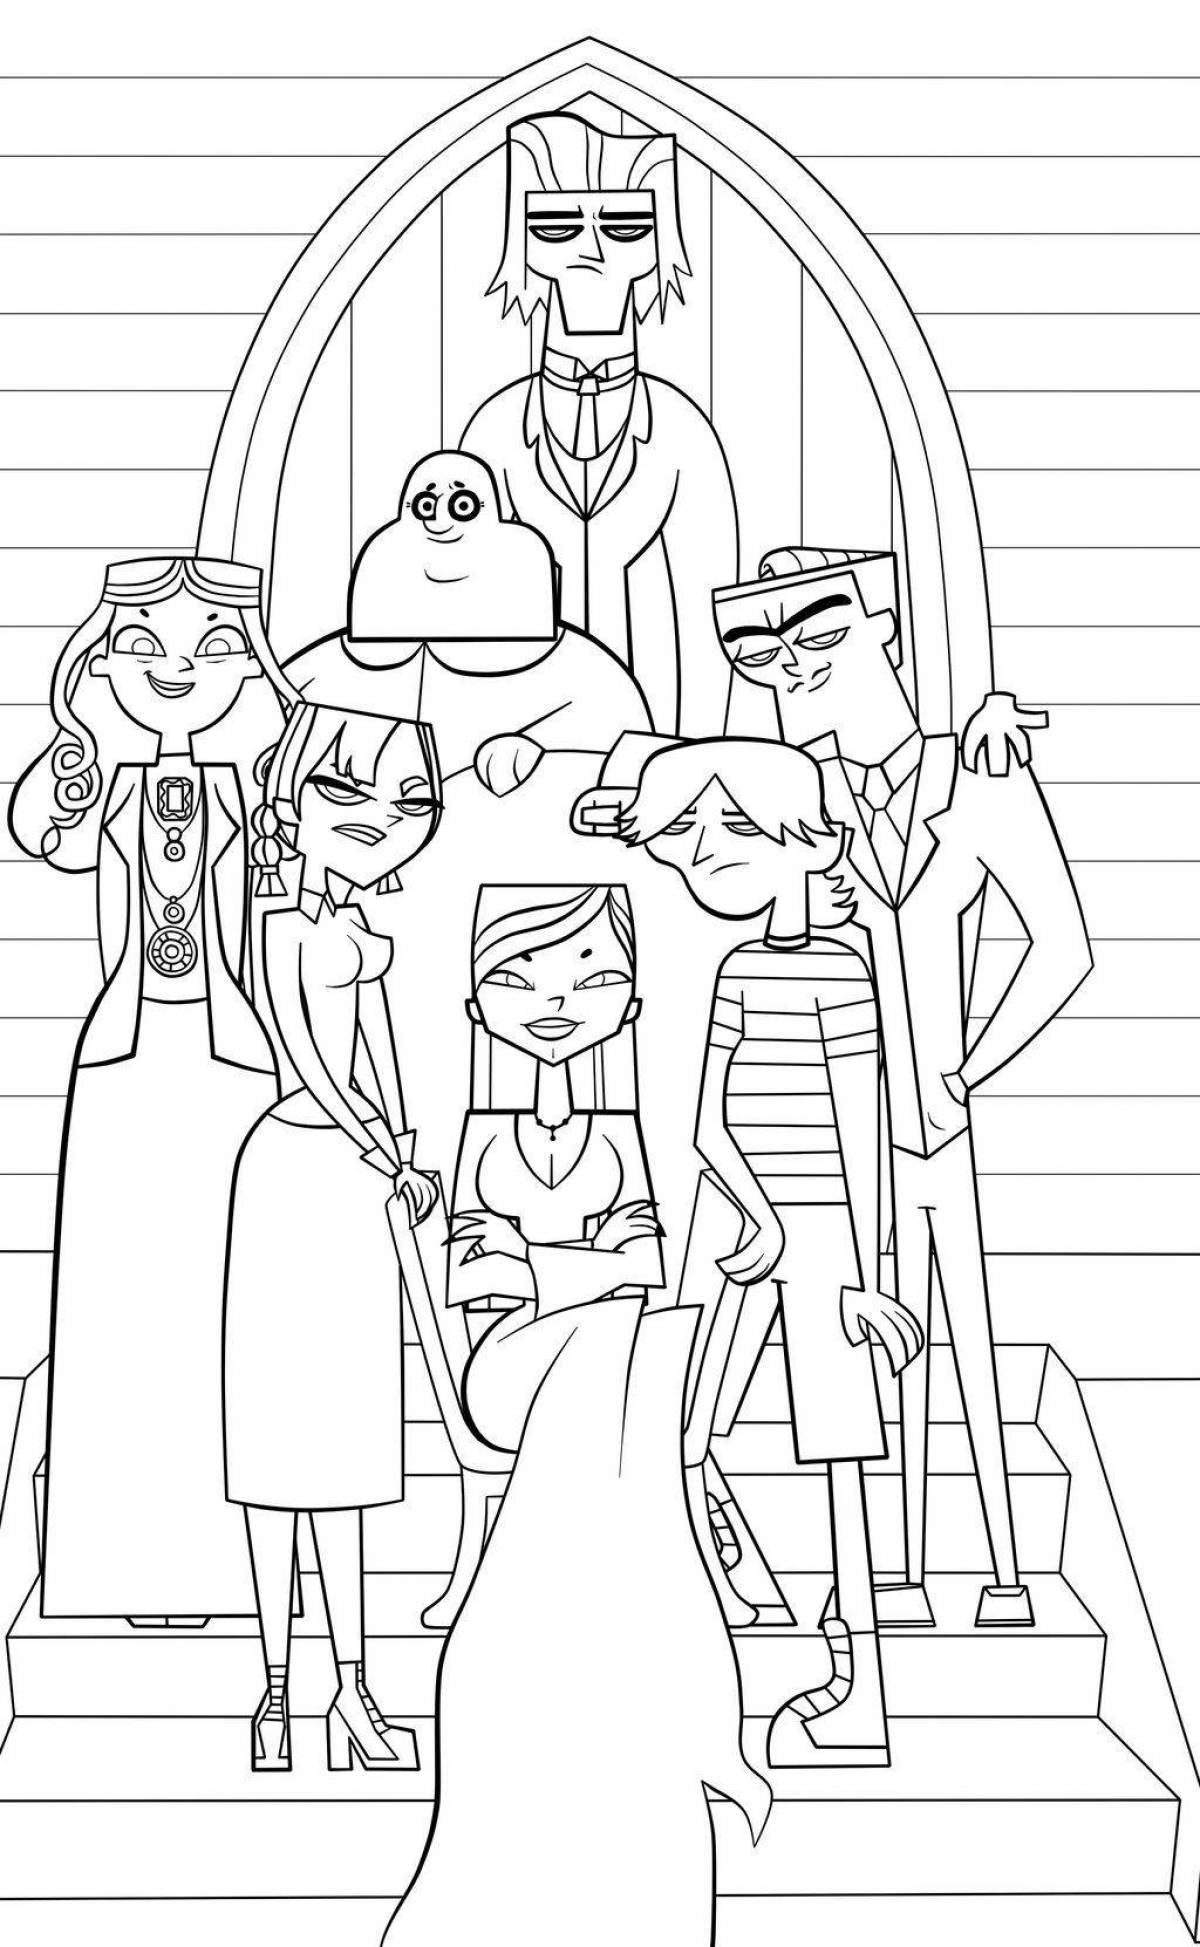 The Addams Family coloring page